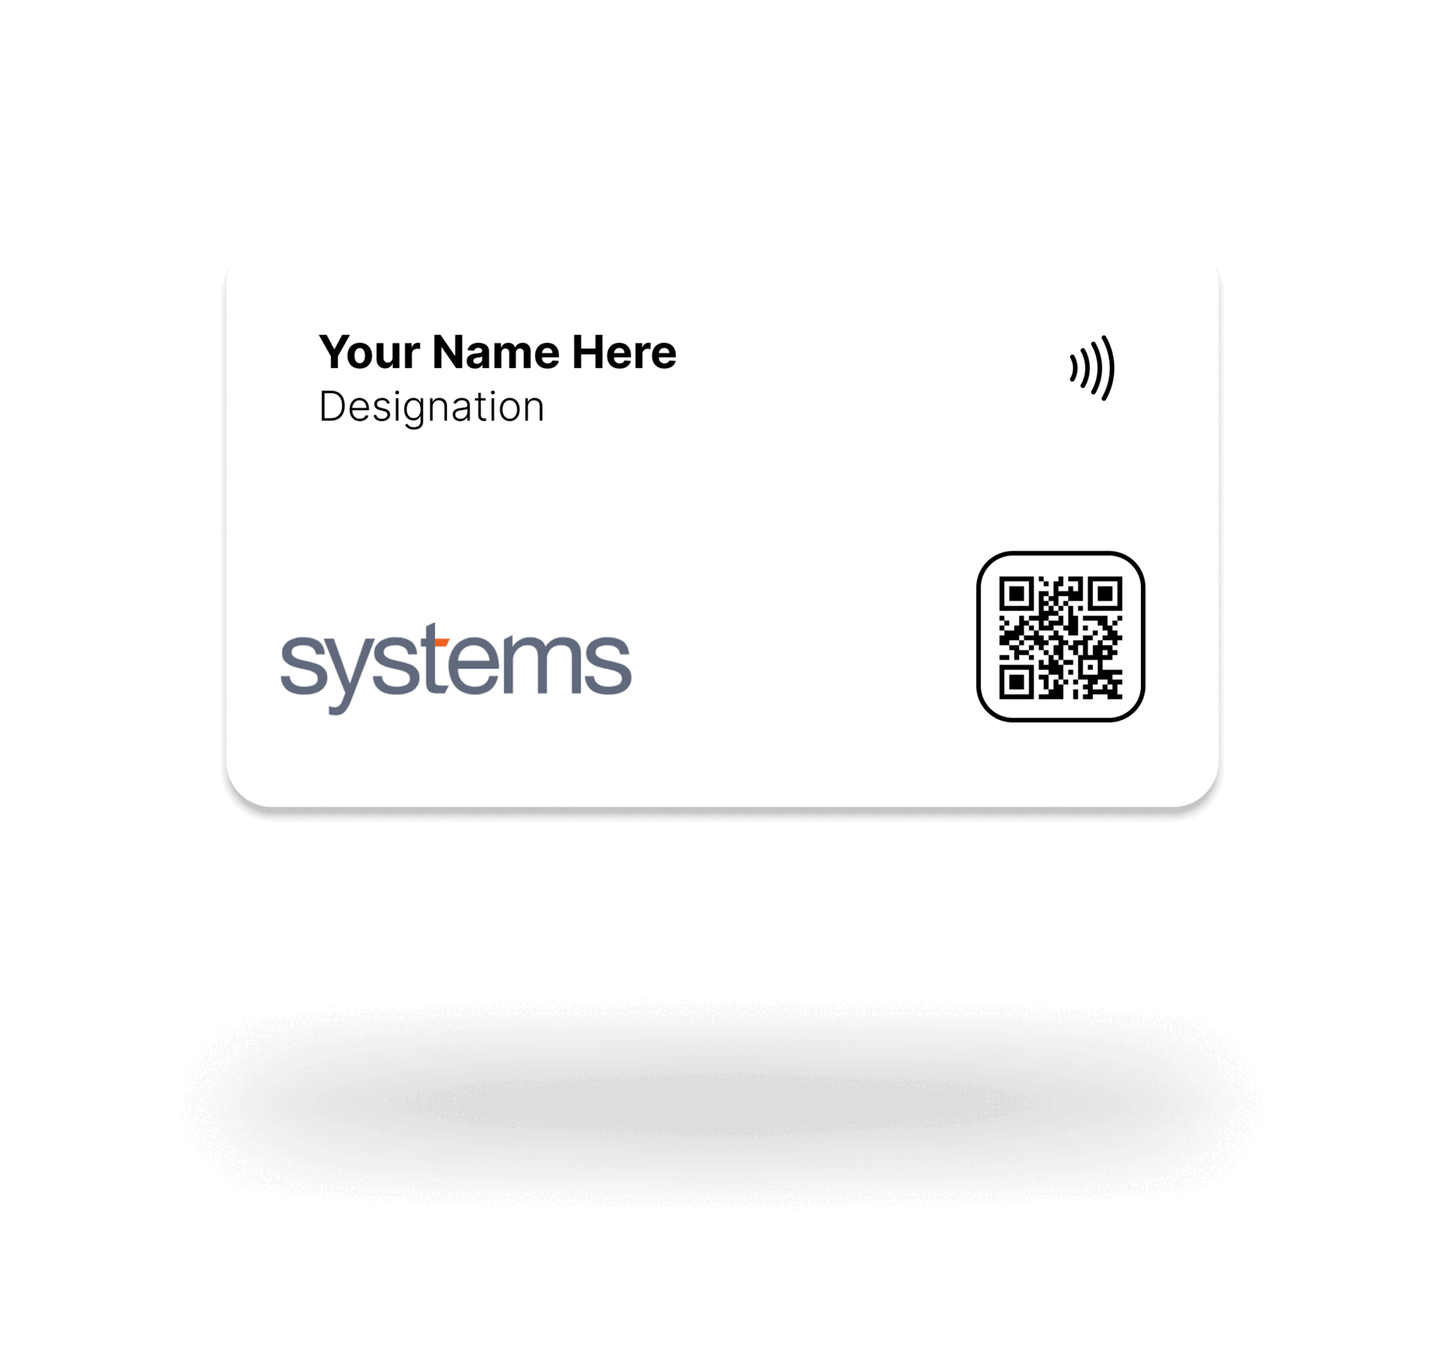 Tapmee Card - Smart Business Card